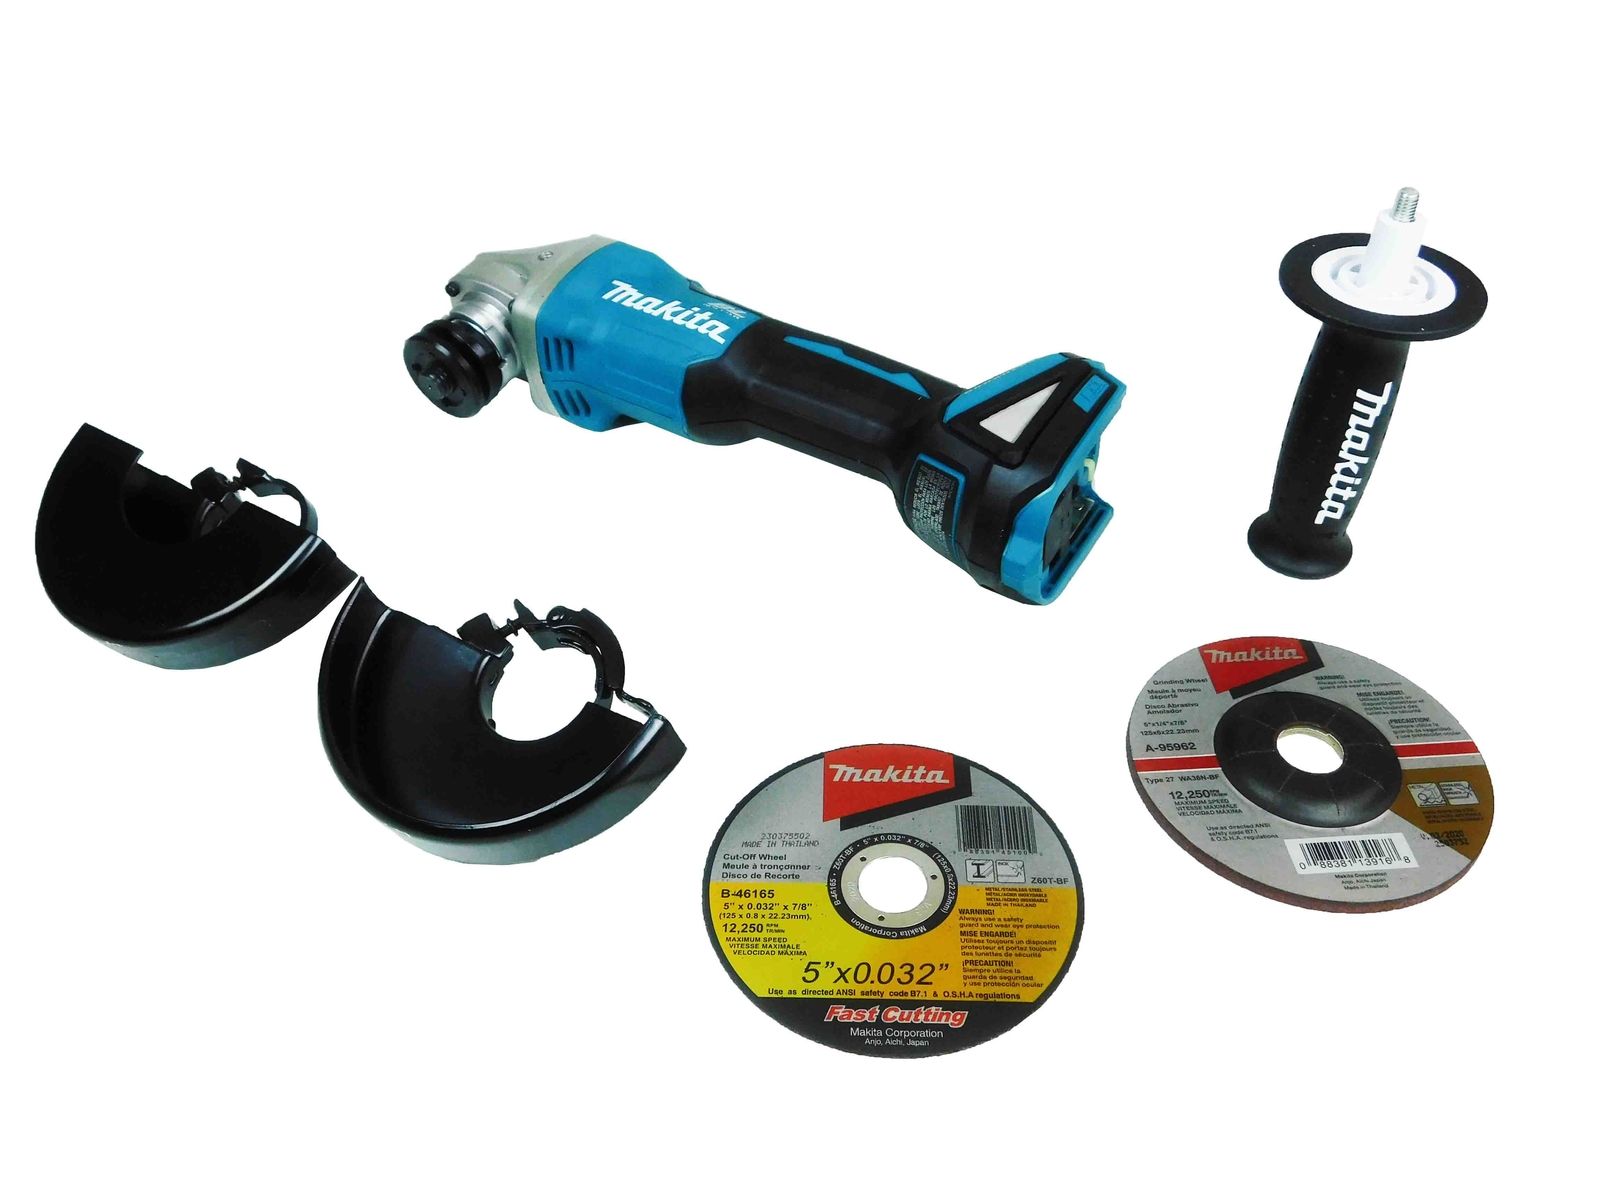 XAG04Z 18V LXT Lithium‑Ion Brushless Cordless 4‑1/2” / 5" Cut‑Off/Angle Grinder